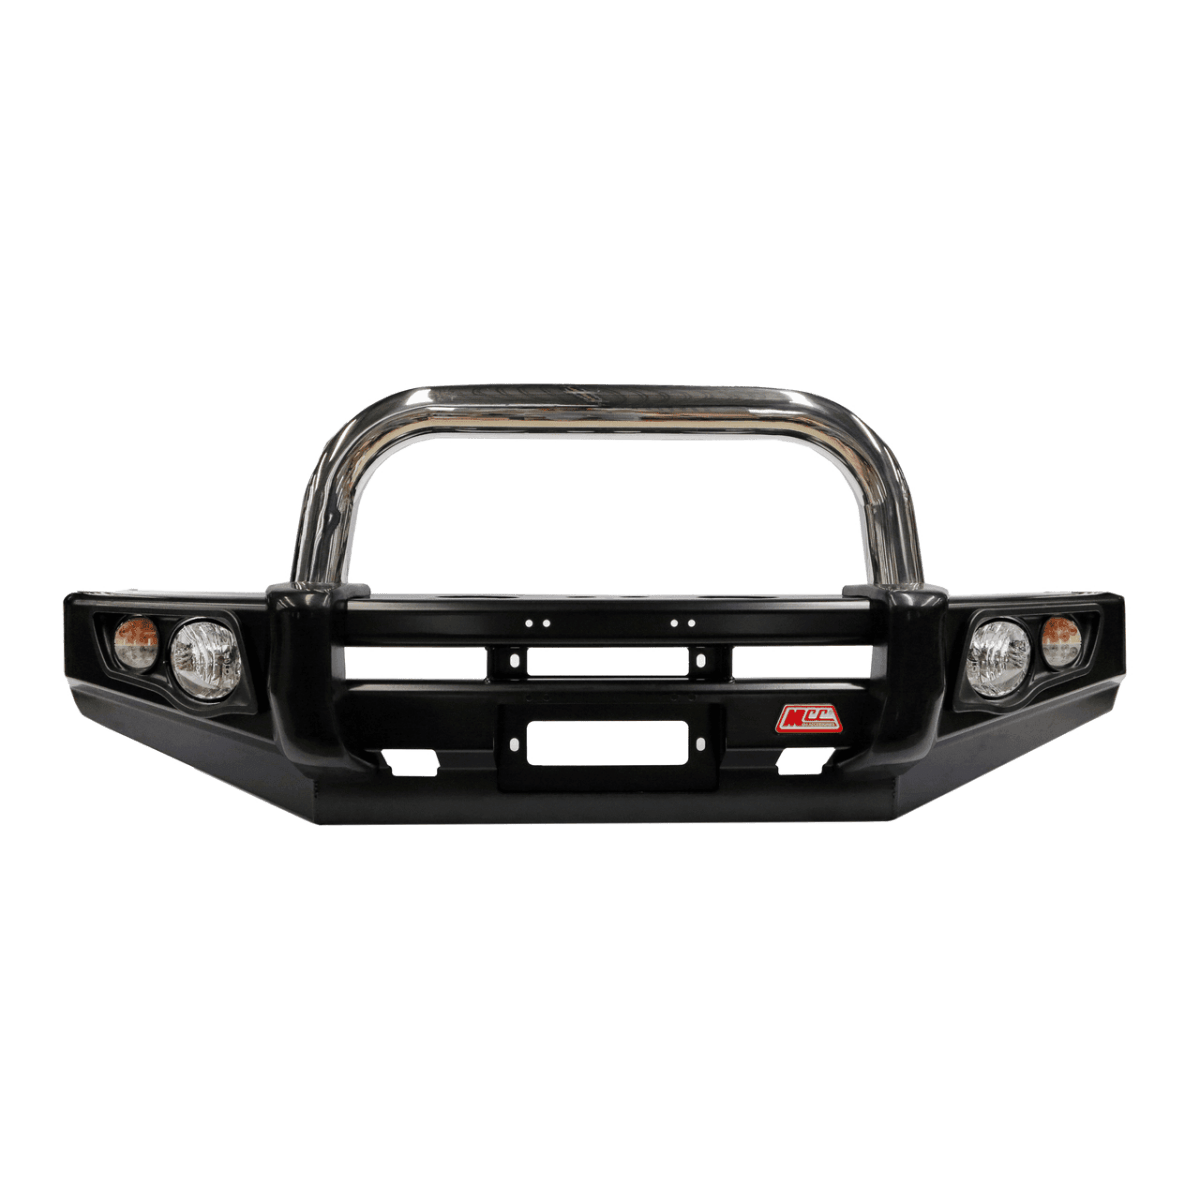 MCC Falcon 707-01 Single Loop Winch Bar for Mitsubishi Triton MQ 2015 - 2018 - Includes Replacement Washer Bottle and Underbody Protection Plates - NZ Offroader